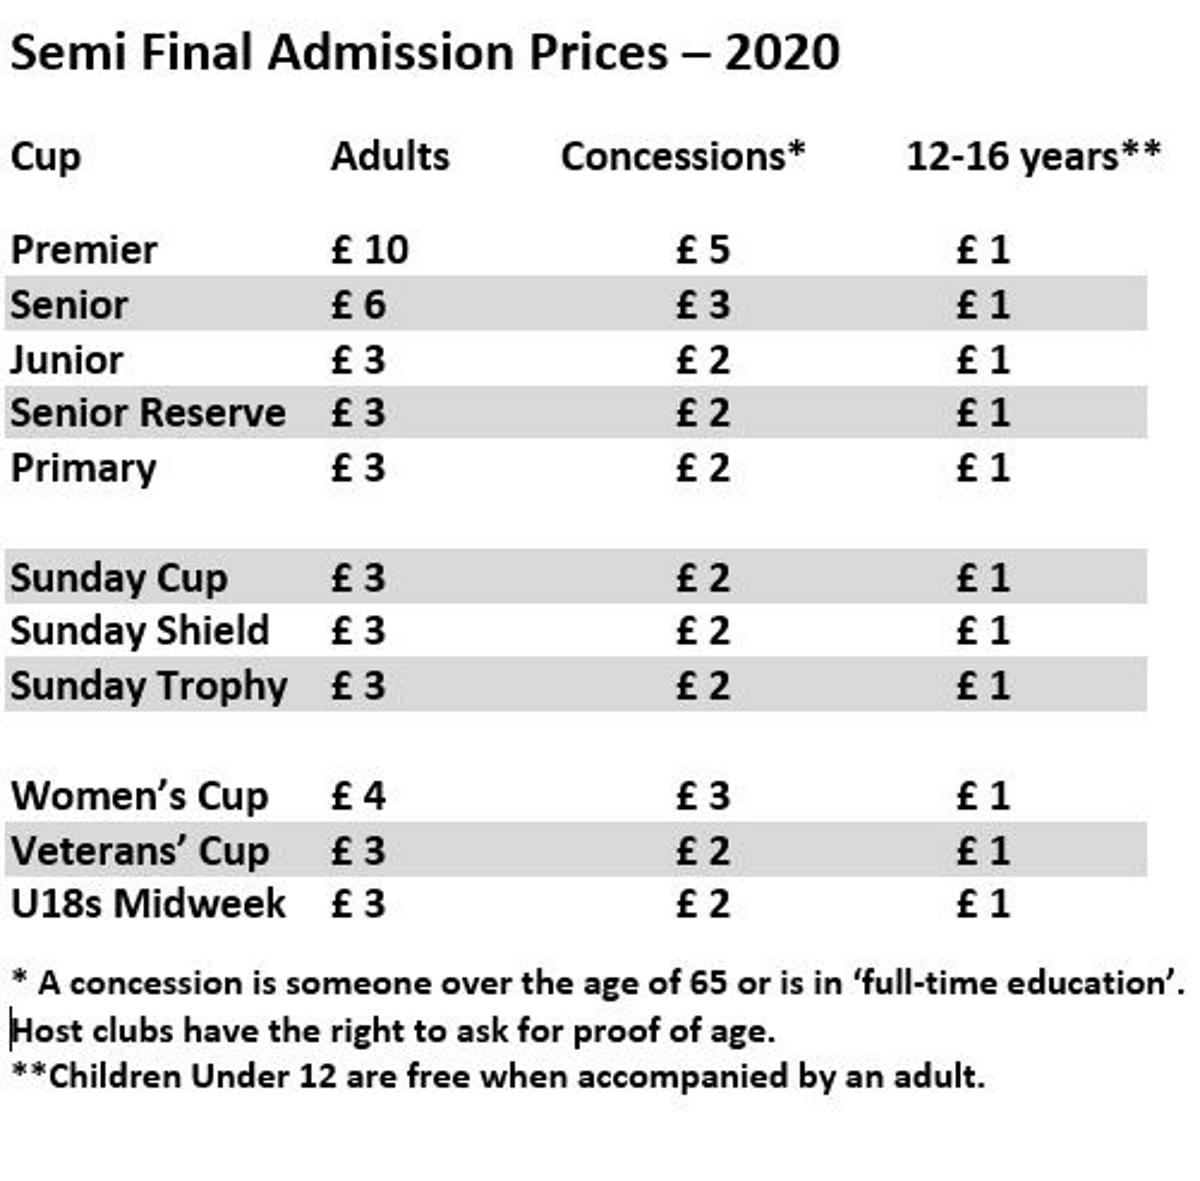 County Cup Semi-Final Admission Prices 2019-20